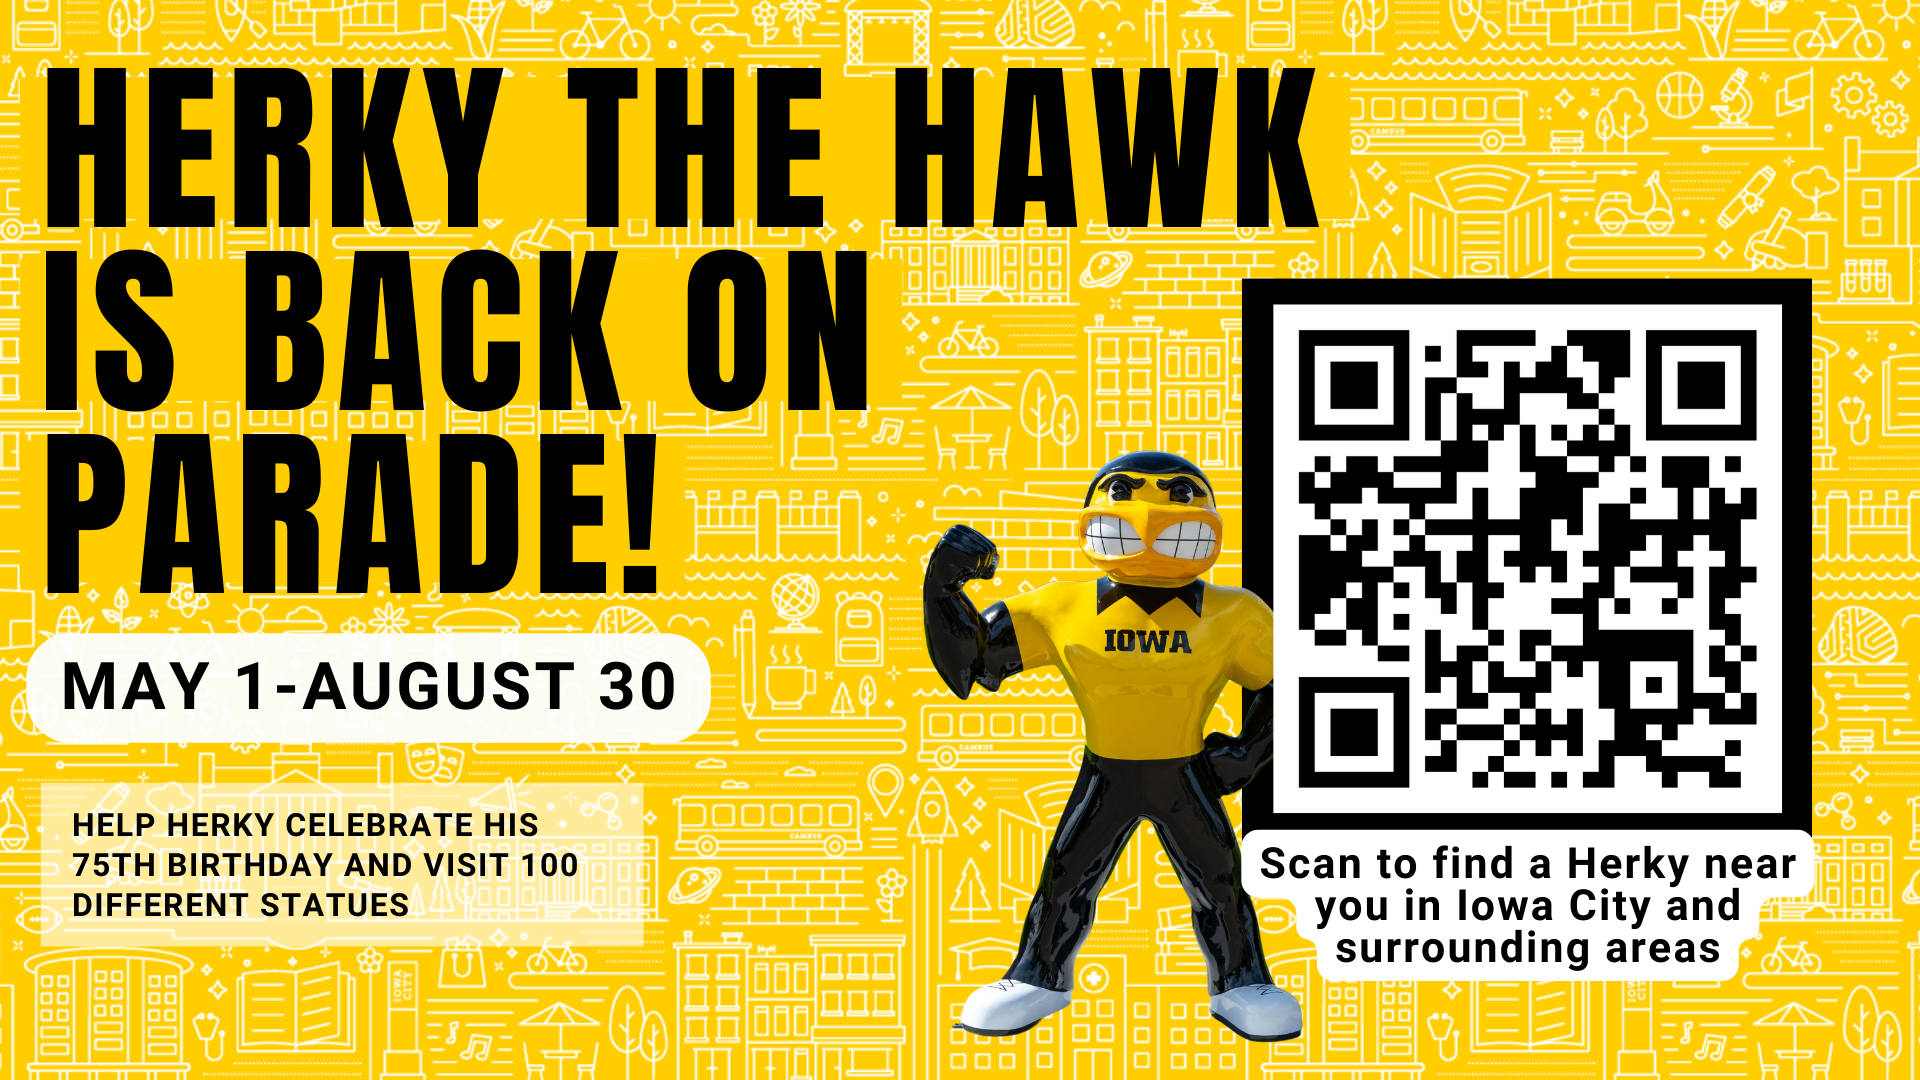 Information about the Herky Hawk Parade. The parade goes from May 1st until August 30th. There are 100 Herky statues around Iowa City and surrounding areas. There is also a QR code that you can scan to find all of the Herkys. 